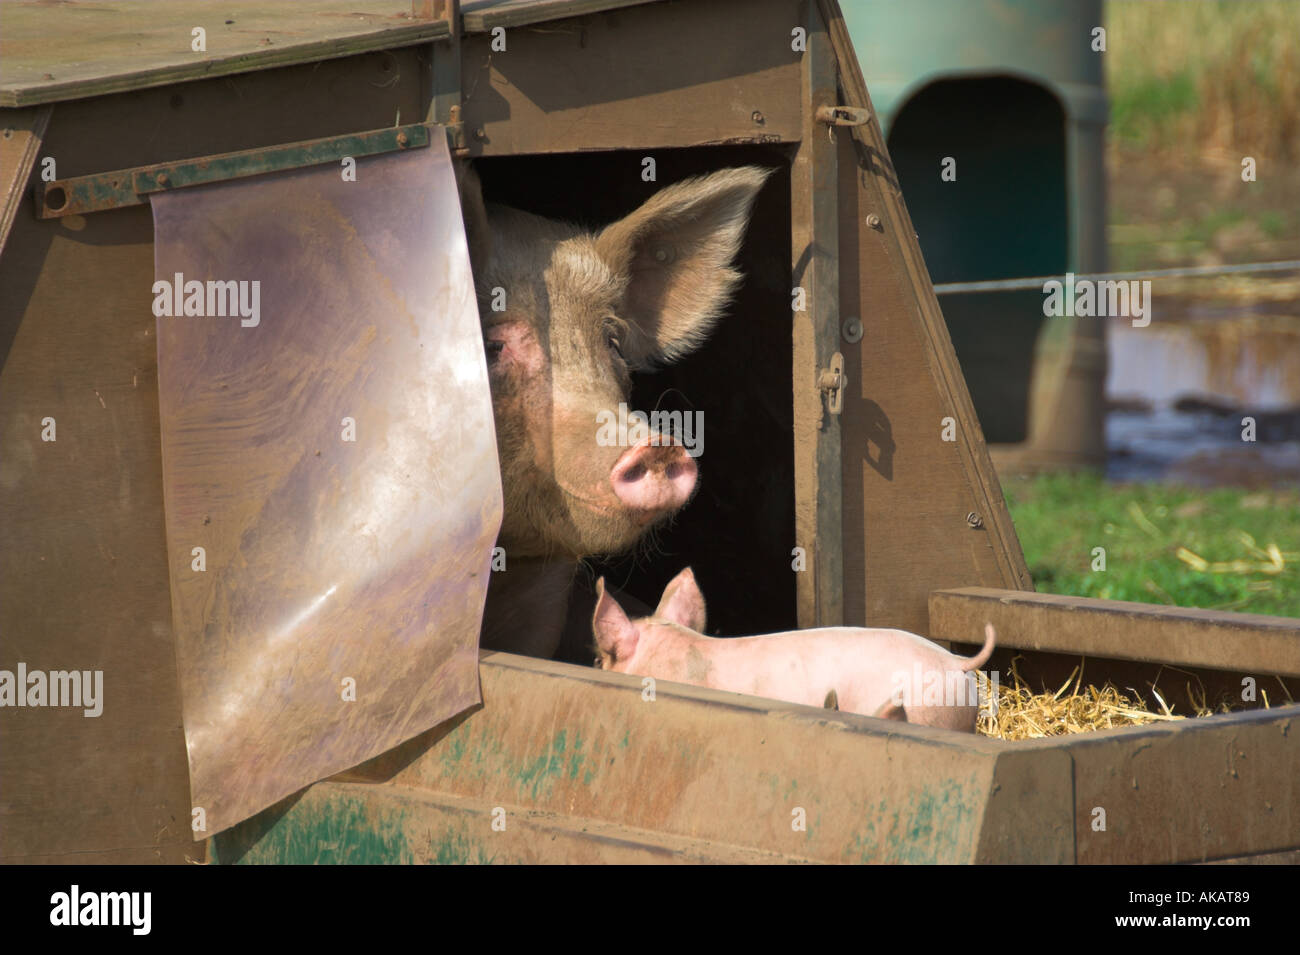 Pig and Pigglet in Sty Stock Photo